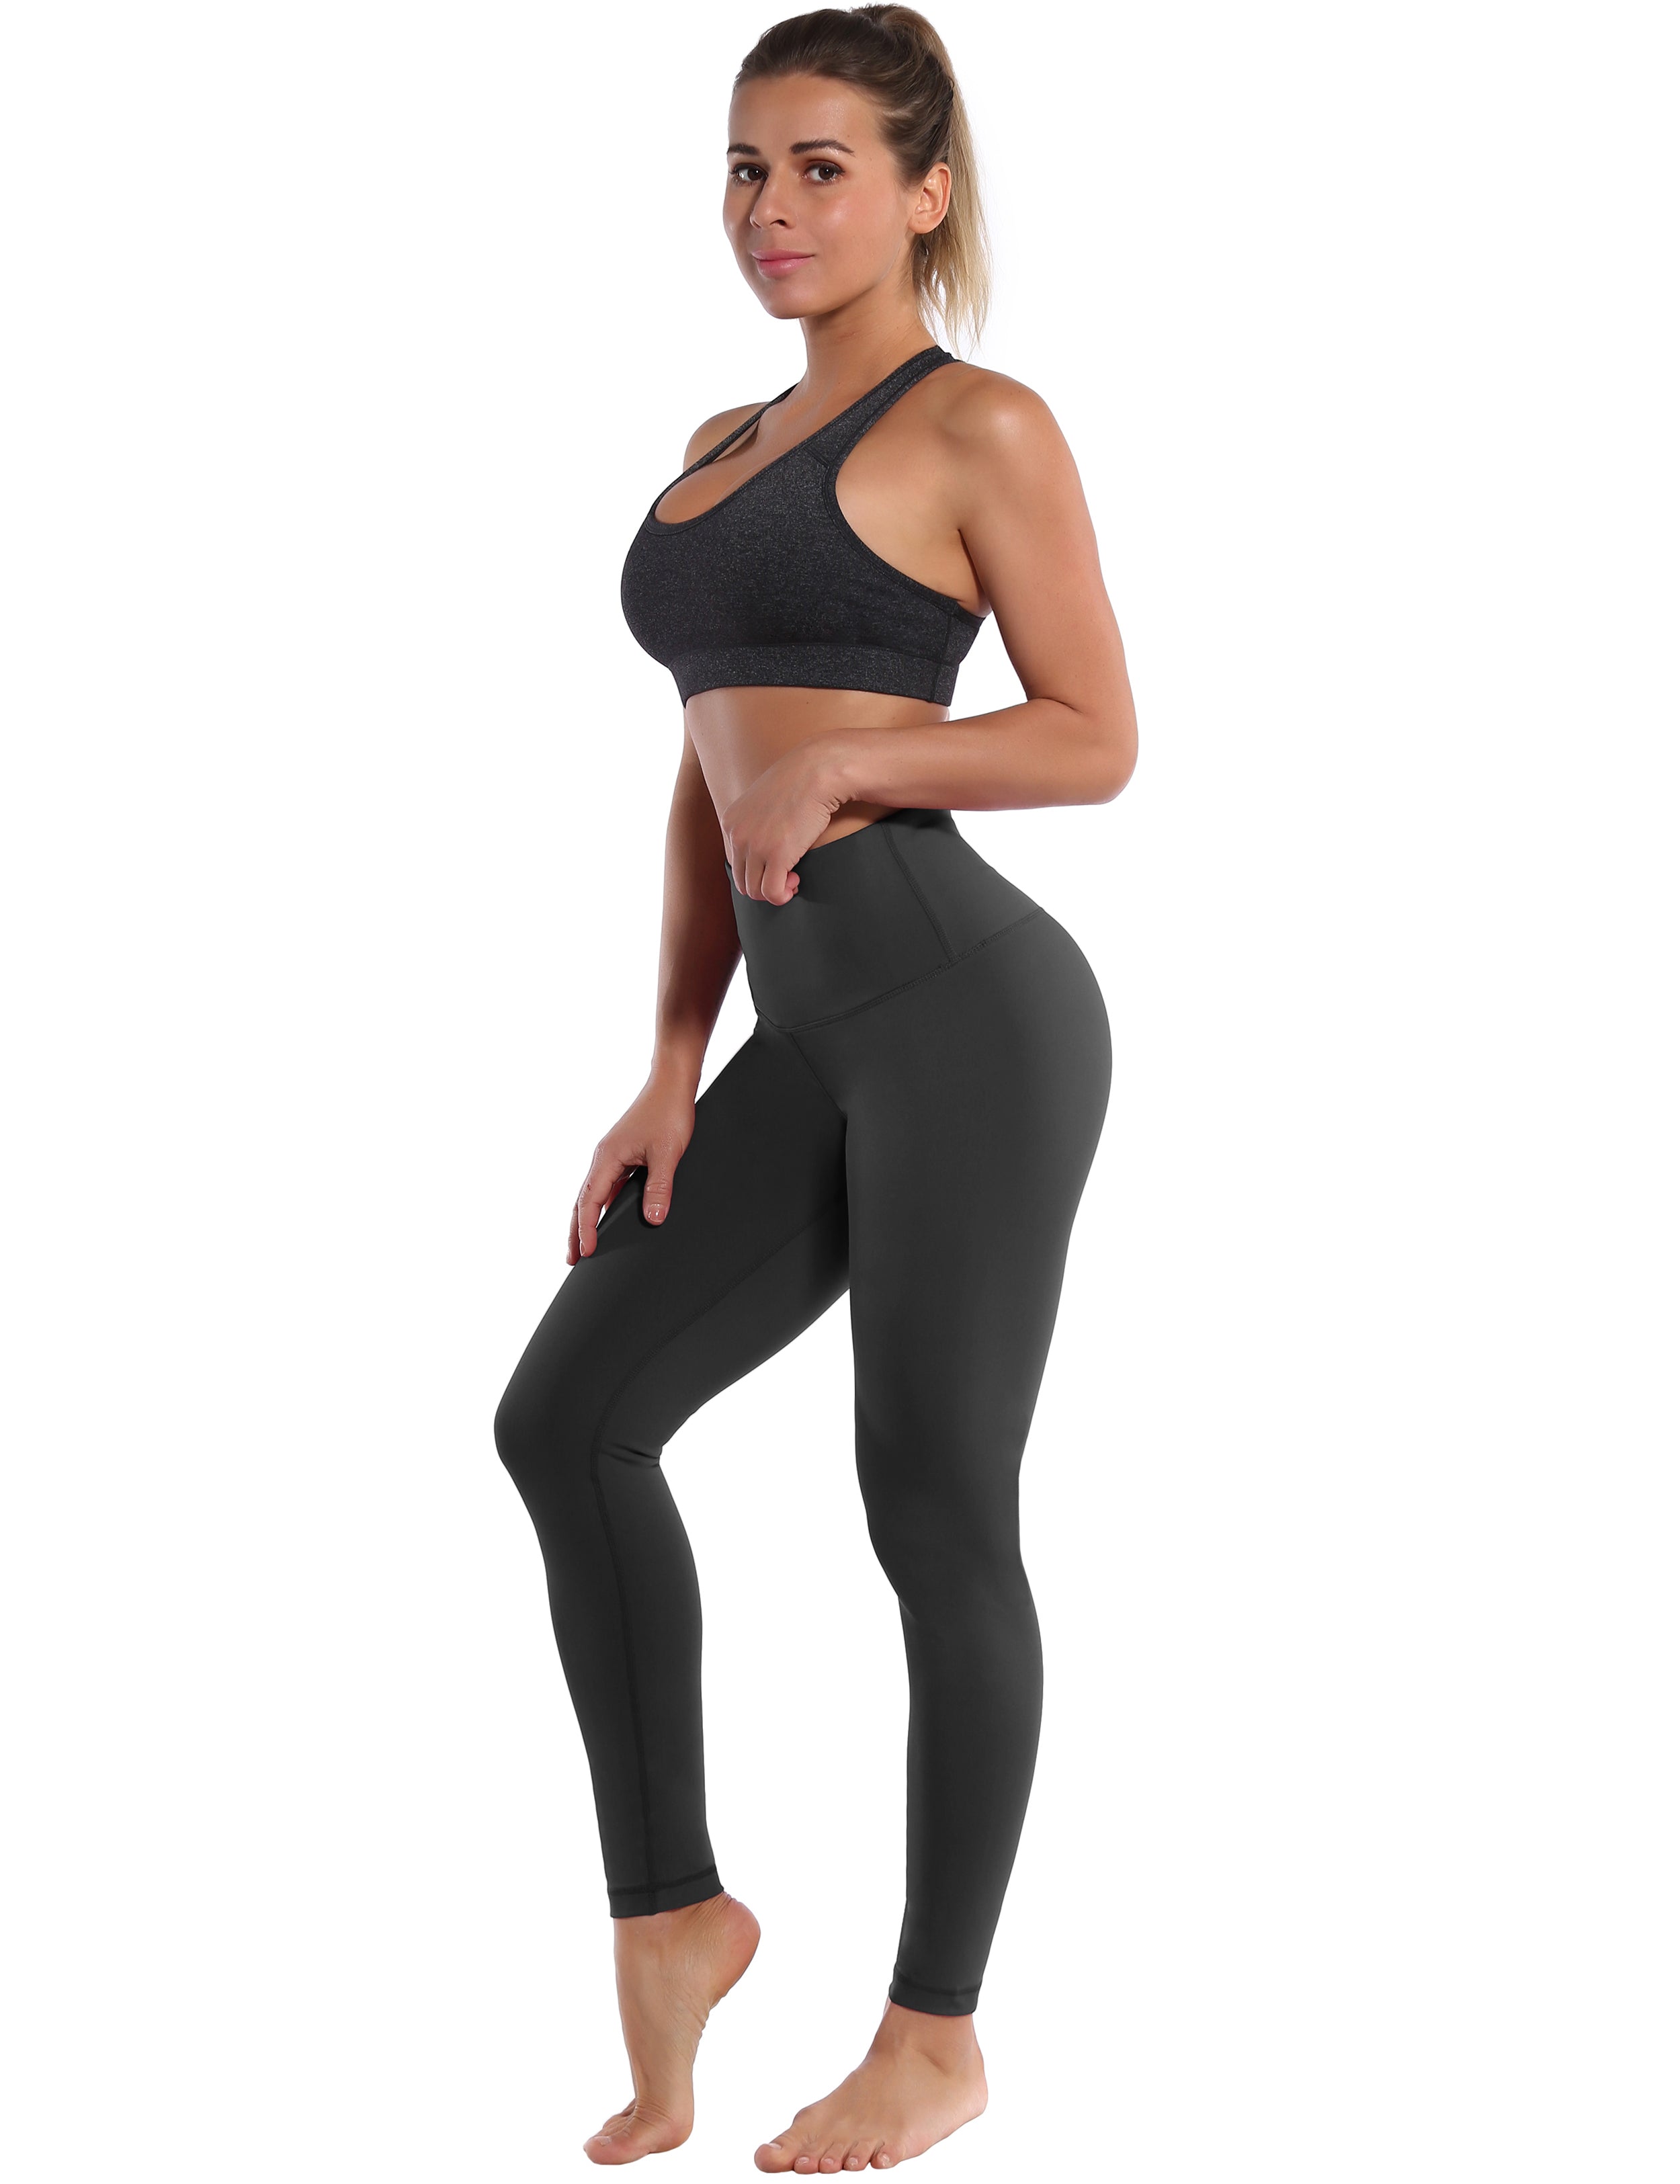 High Waist yogastudio Pants shadowcharcoal 75%Nylon/25%Spandex Fabric doesn't attract lint easily 4-way stretch No see-through Moisture-wicking Tummy control Inner pocket Four lengths